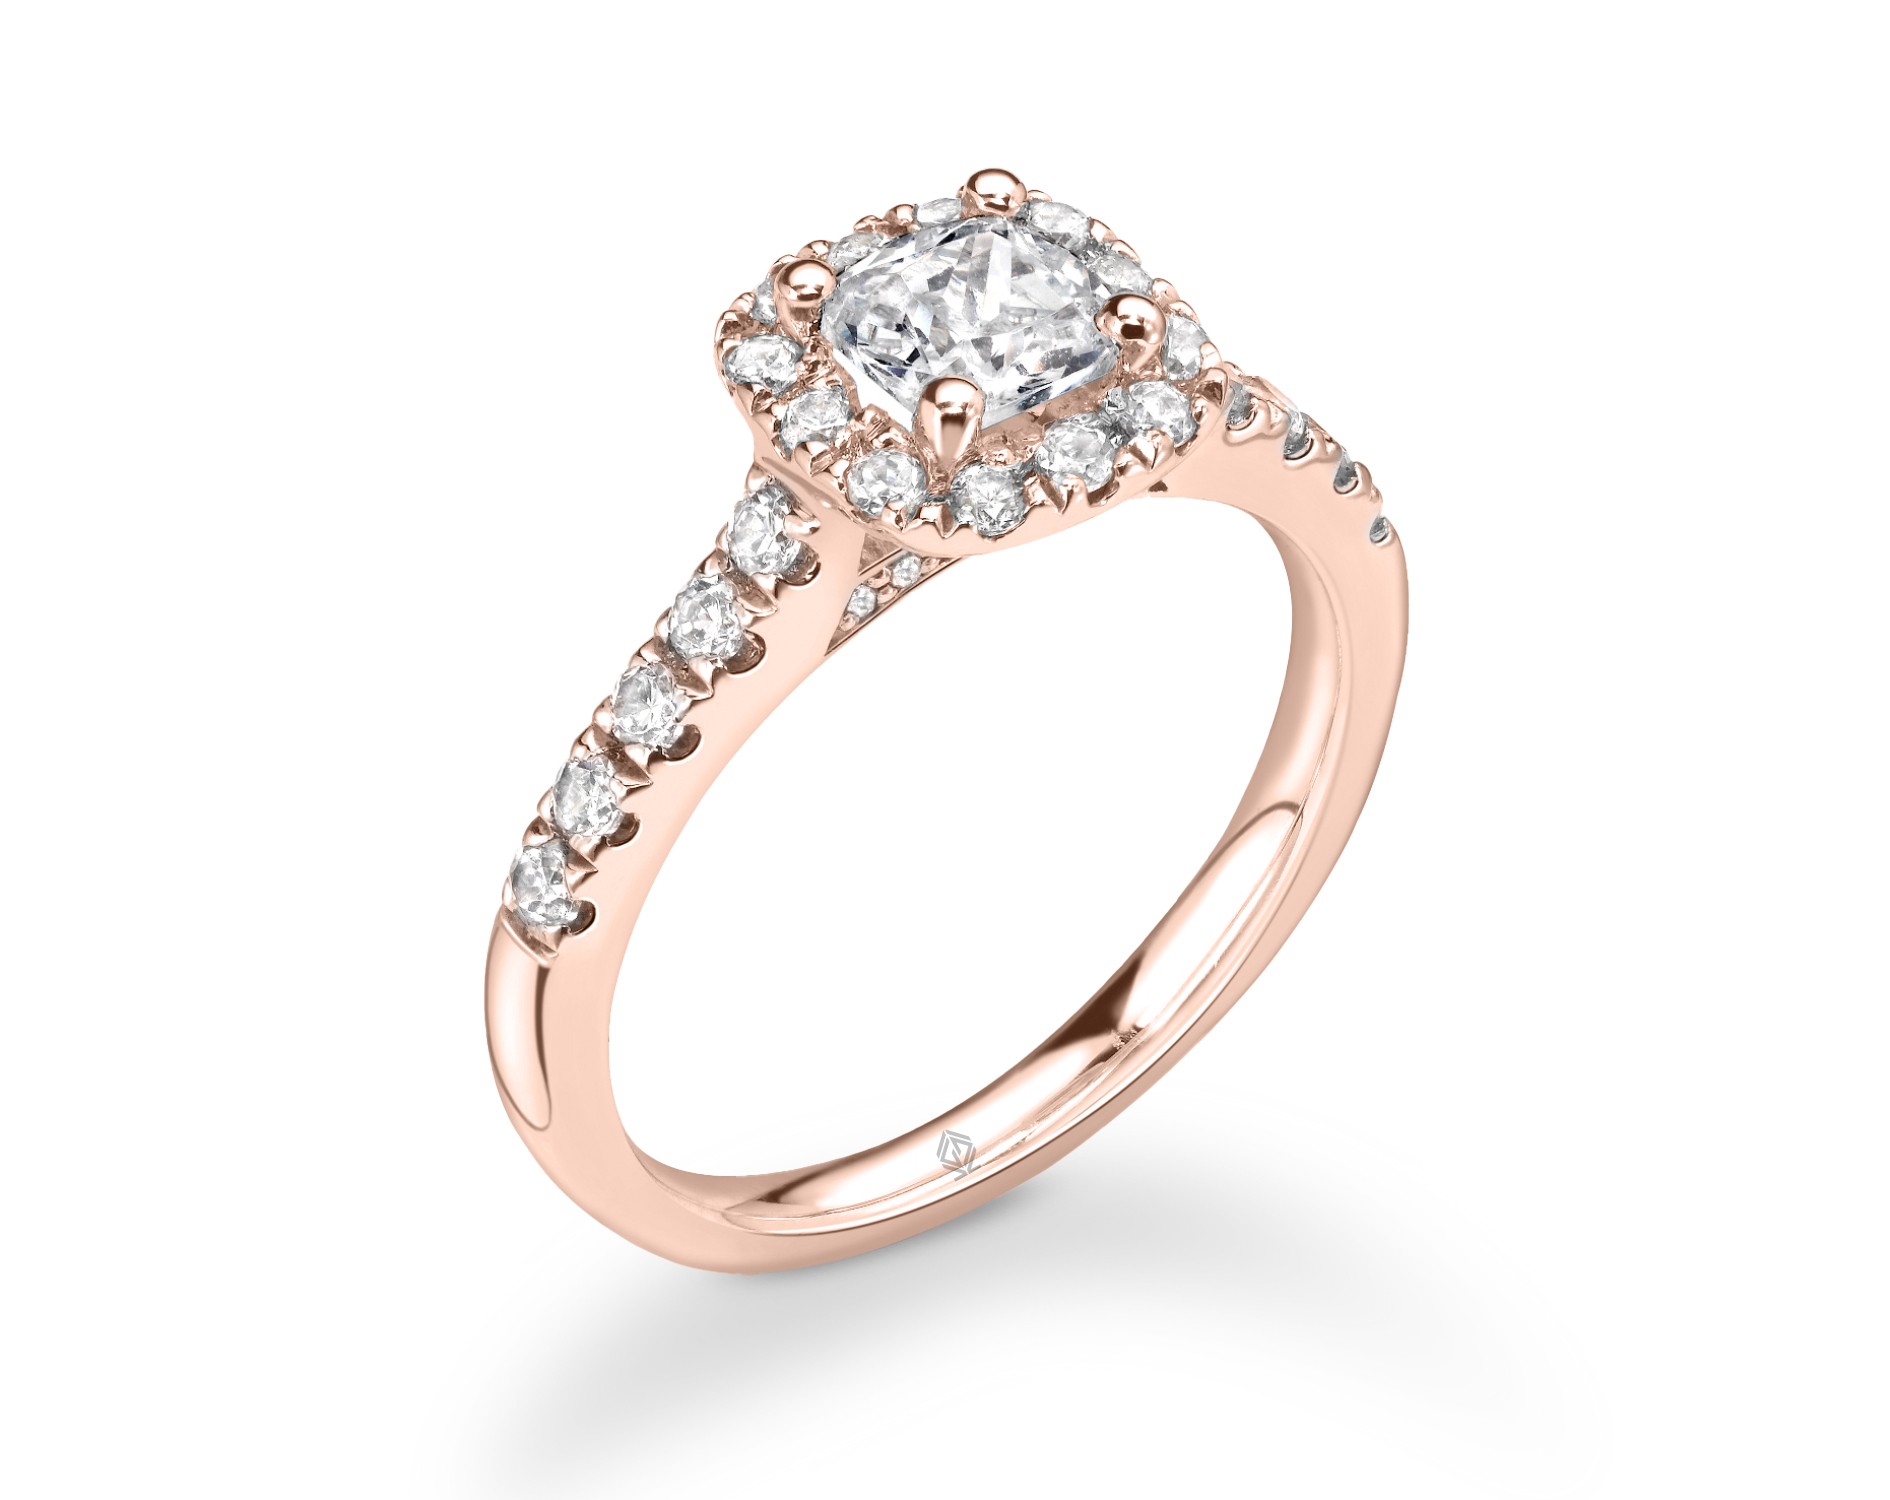 18K ROSE GOLD HALO CUSHION CUT DIAMOND ENGAGEMENT RING WITH SIDE STONES PAVE SET